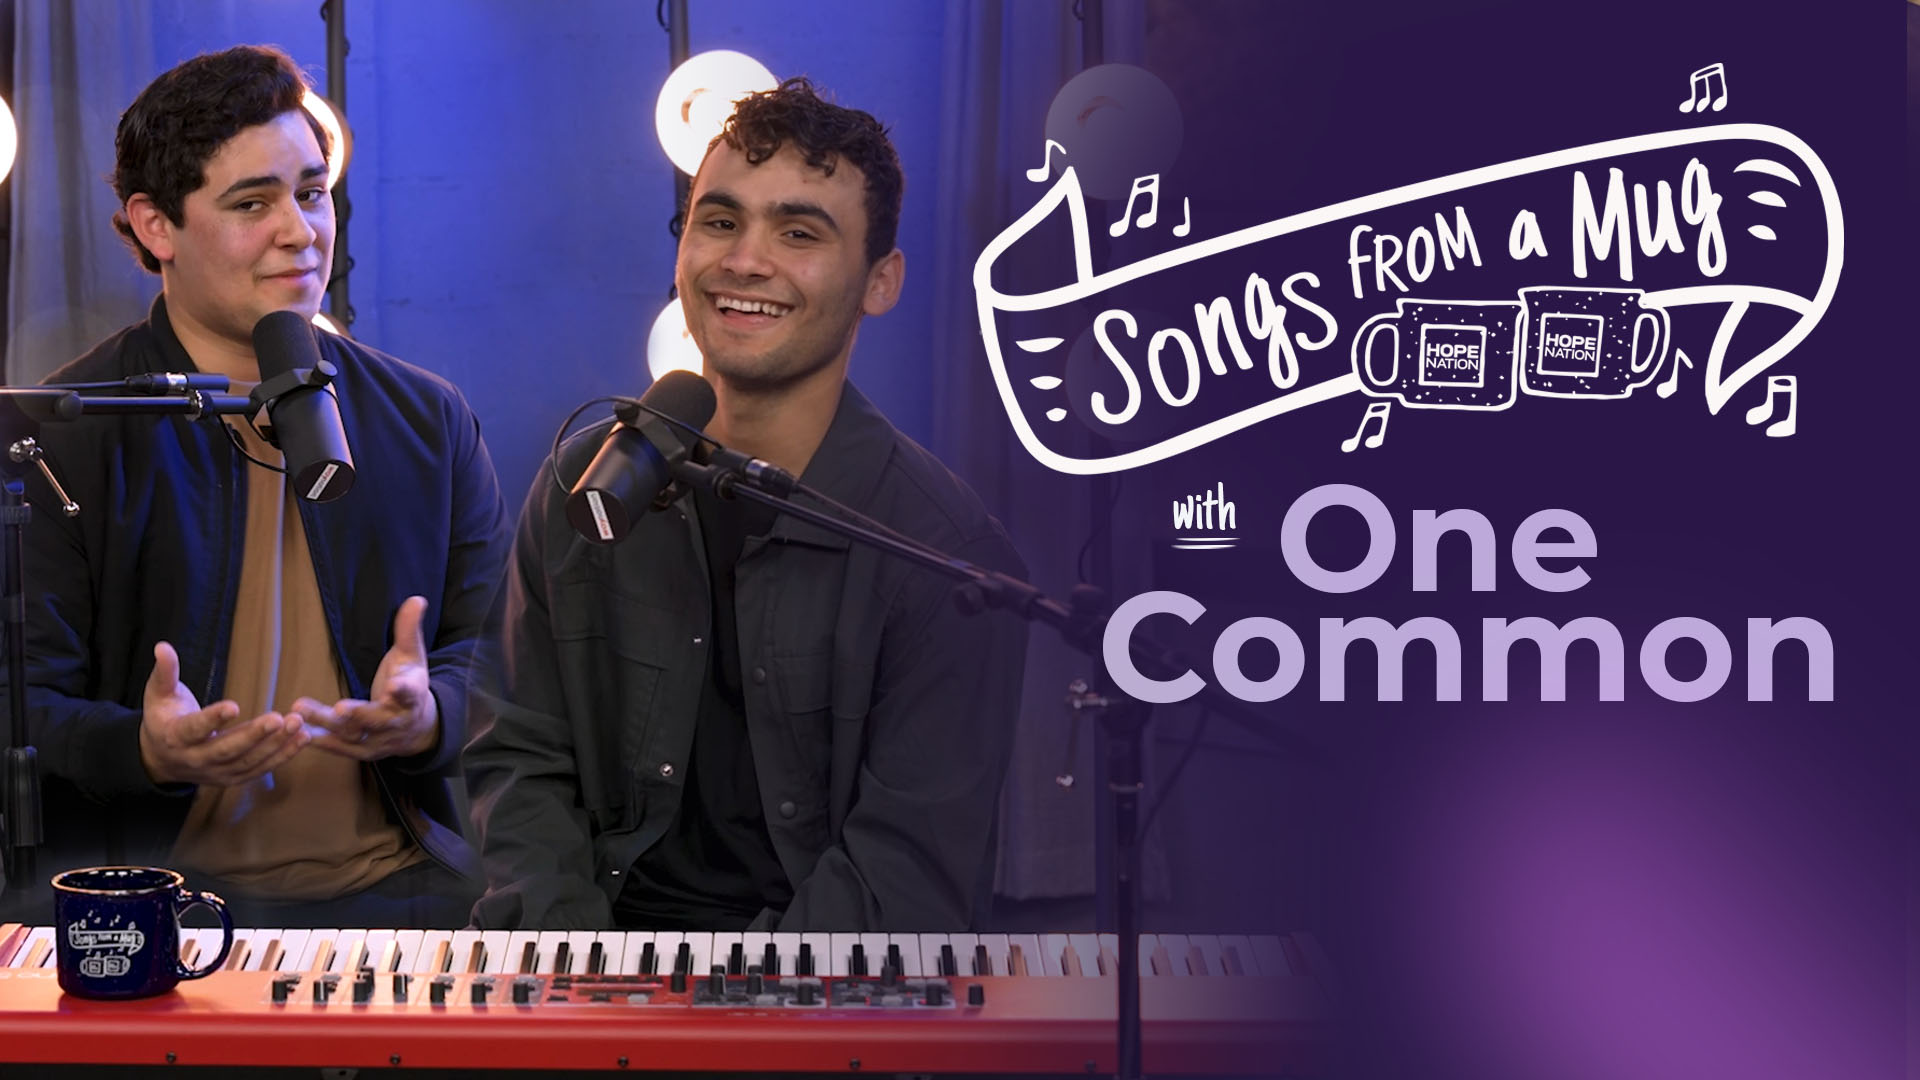 One Common, the Brother Duo, Harmonizes to Maverick City Music, Taio Cruz, and FOR KING + COUNTRY | Songs From a Mug